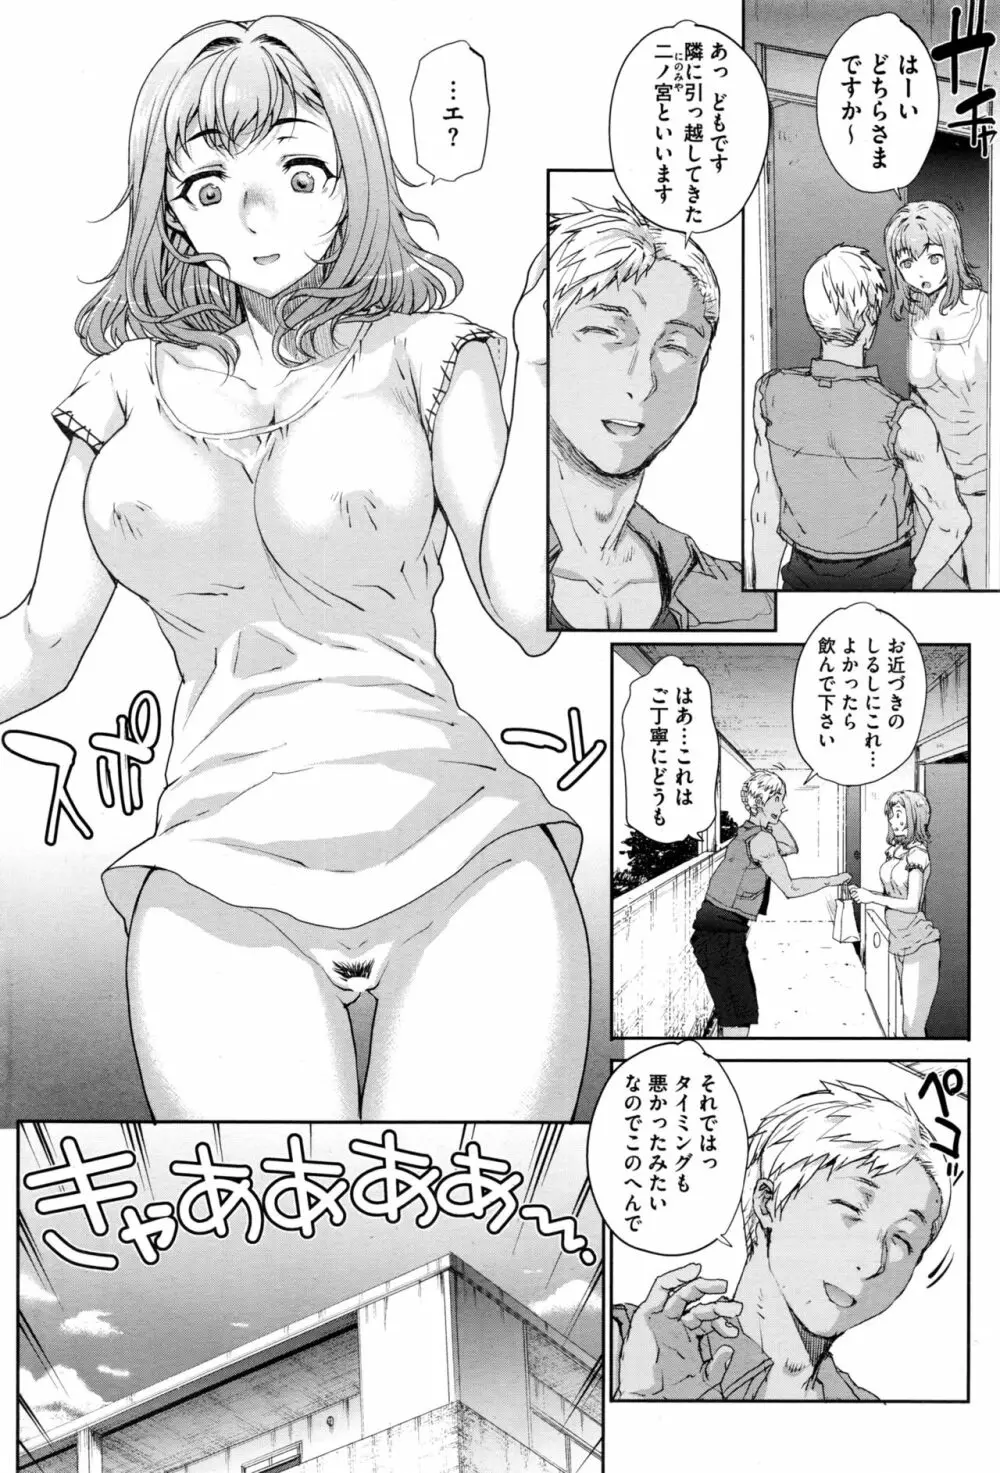 [Carn] Tanshinfunin ~Sisters~ Ch 1-7 4ページ